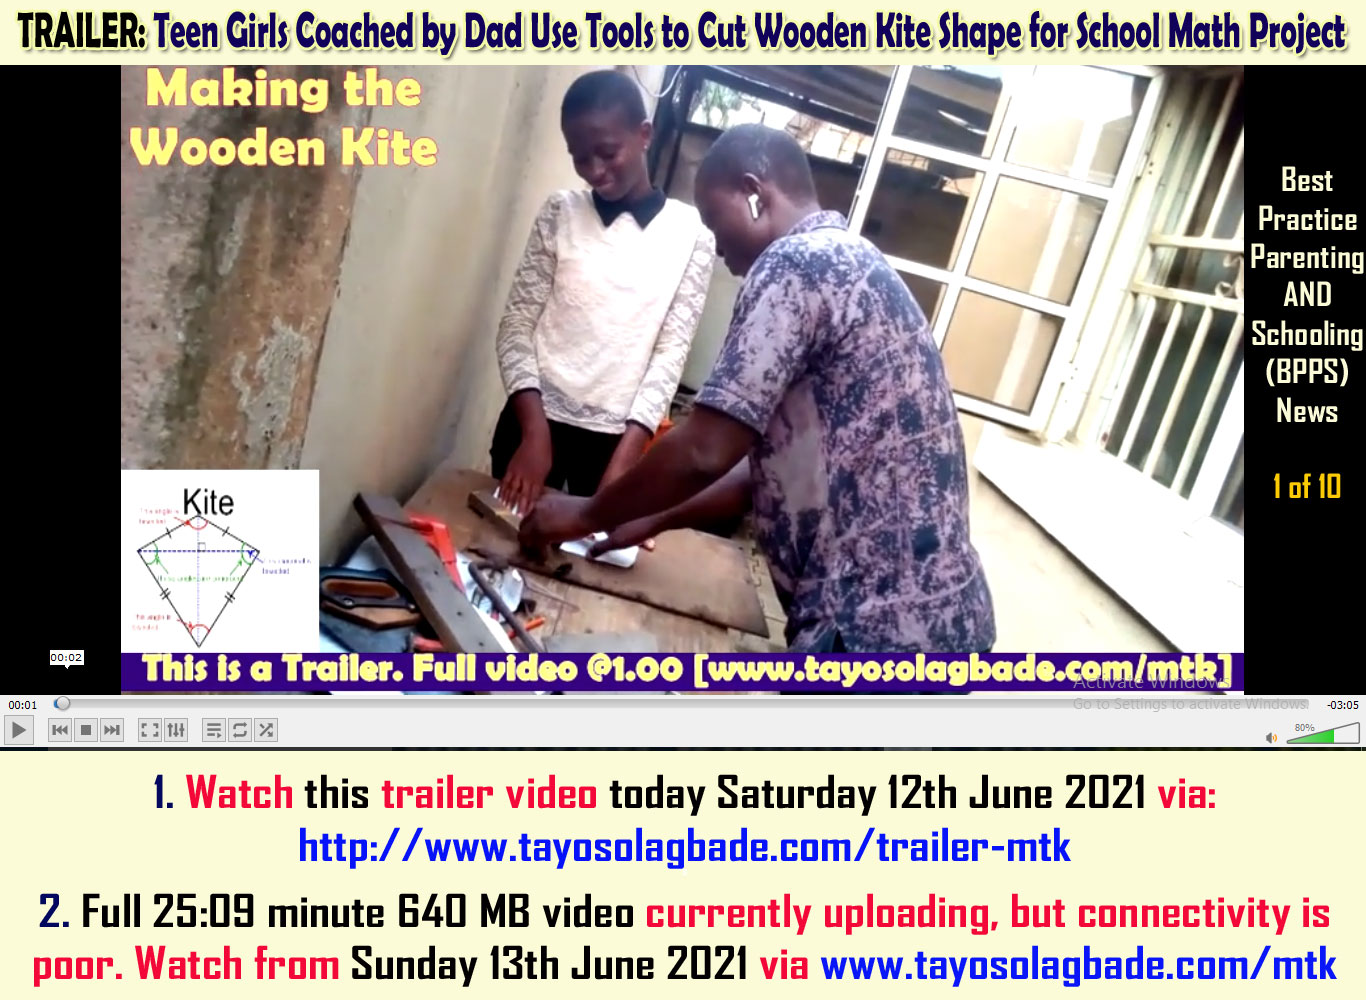 [BPP] TRAILER: Teen Girls Coached by Dad Use Tools to Cut Wooden Kite Shape for School Math Project